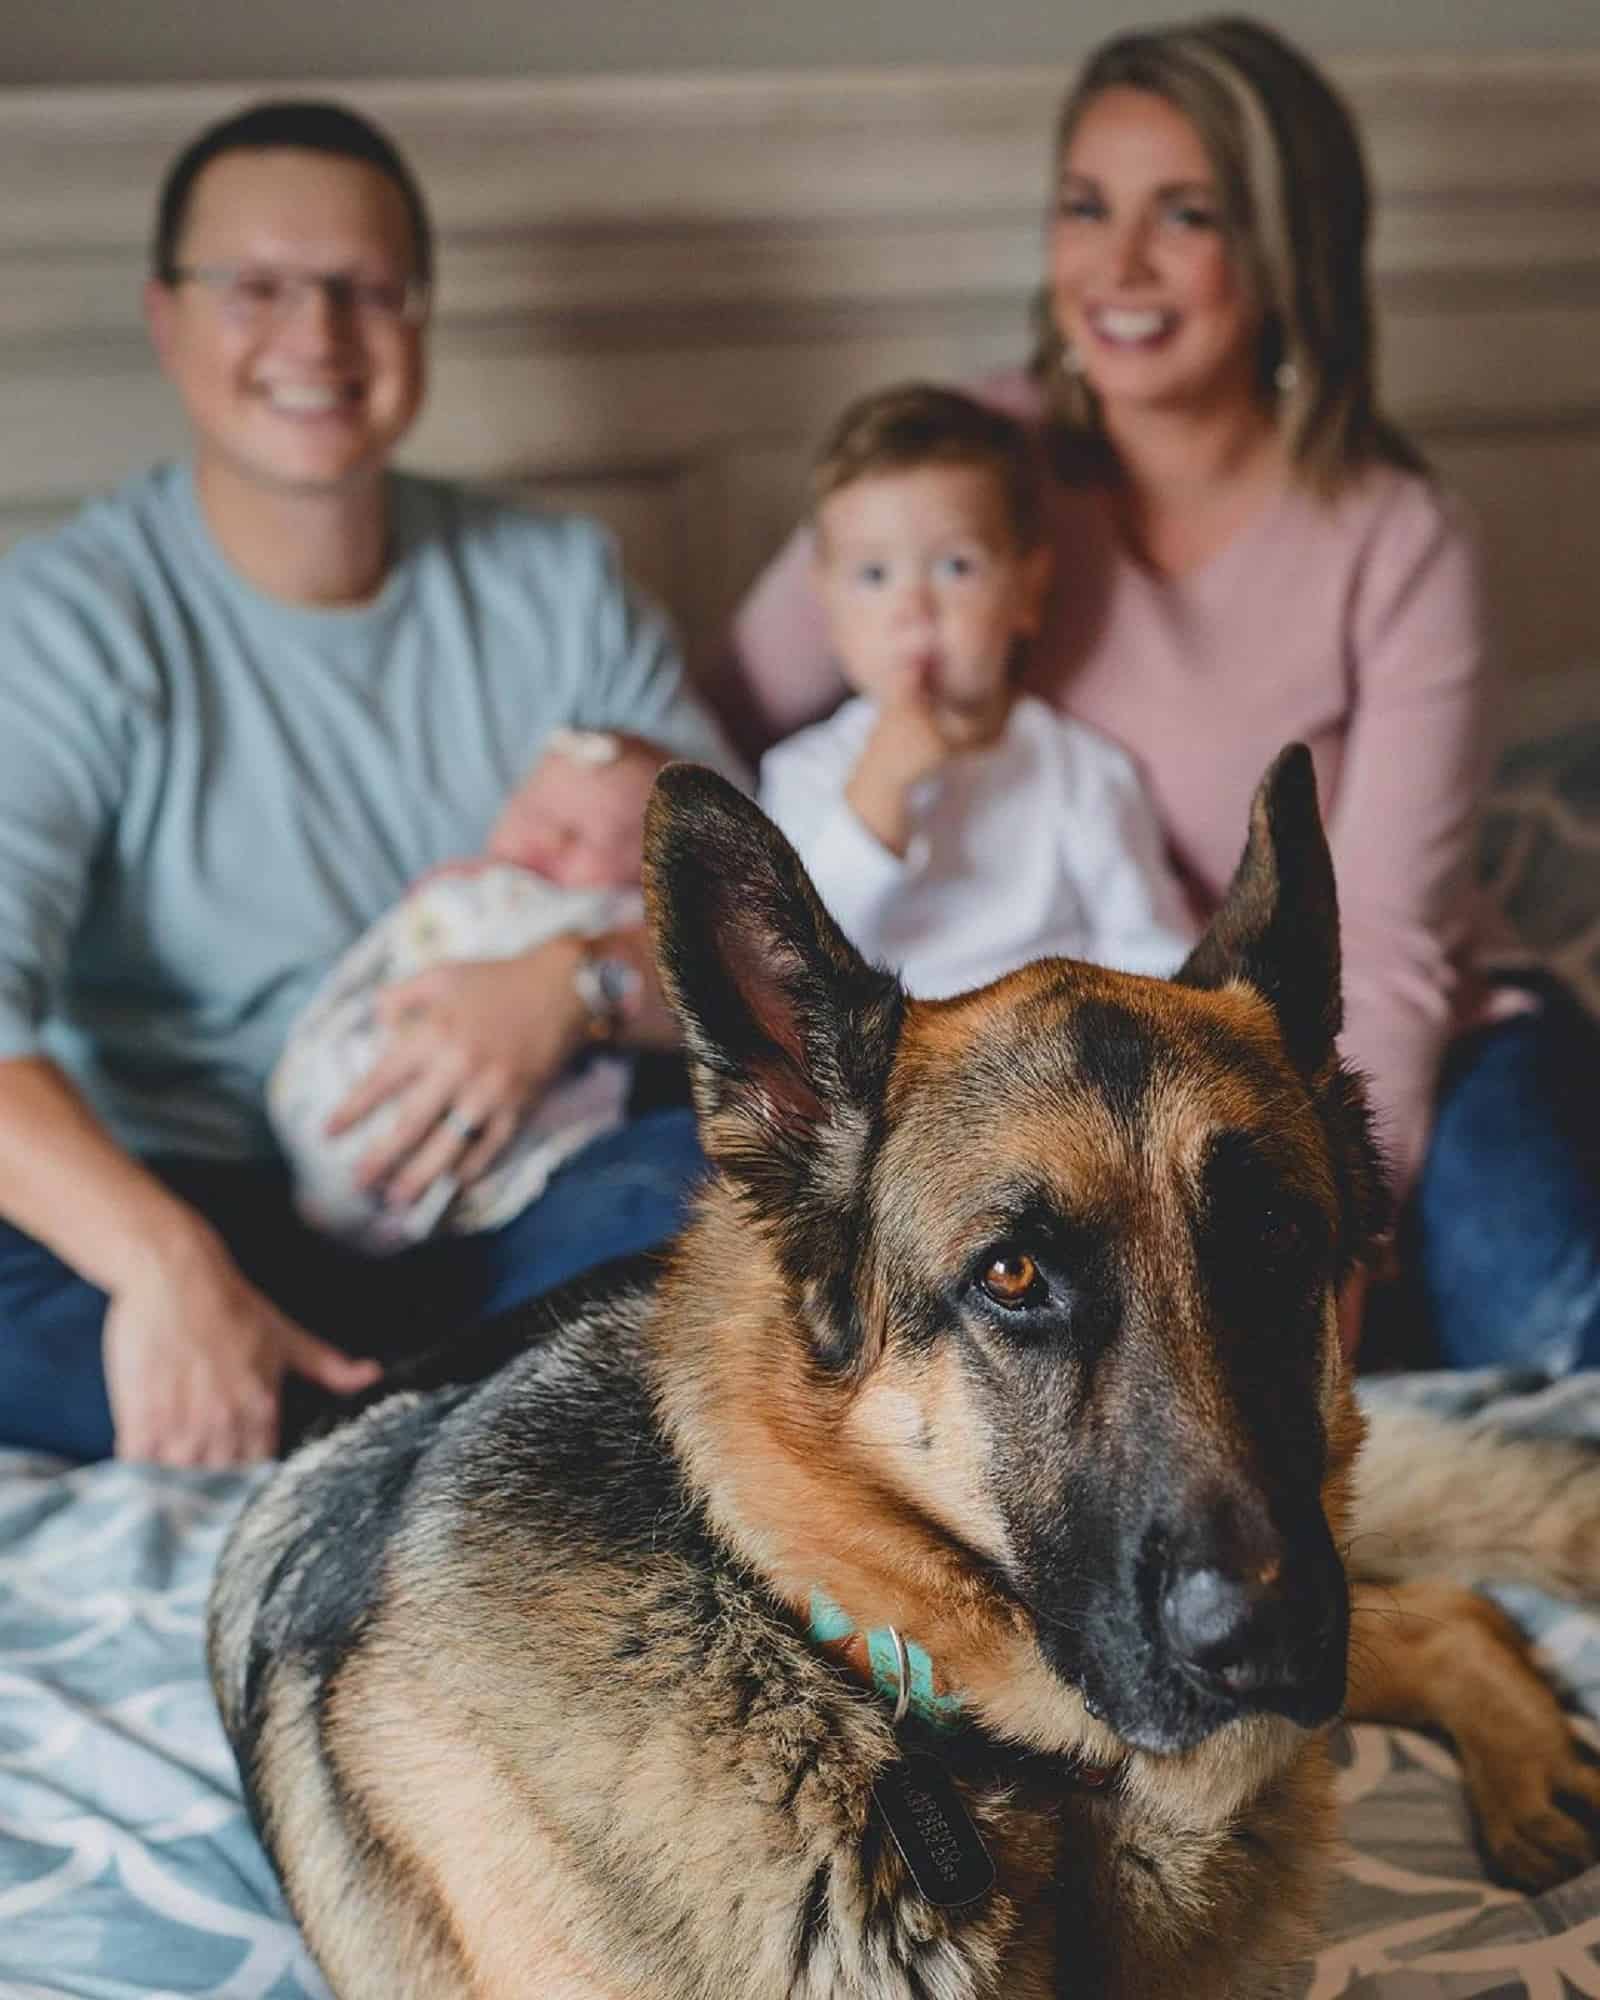 german shepherd dog with his family on the bed